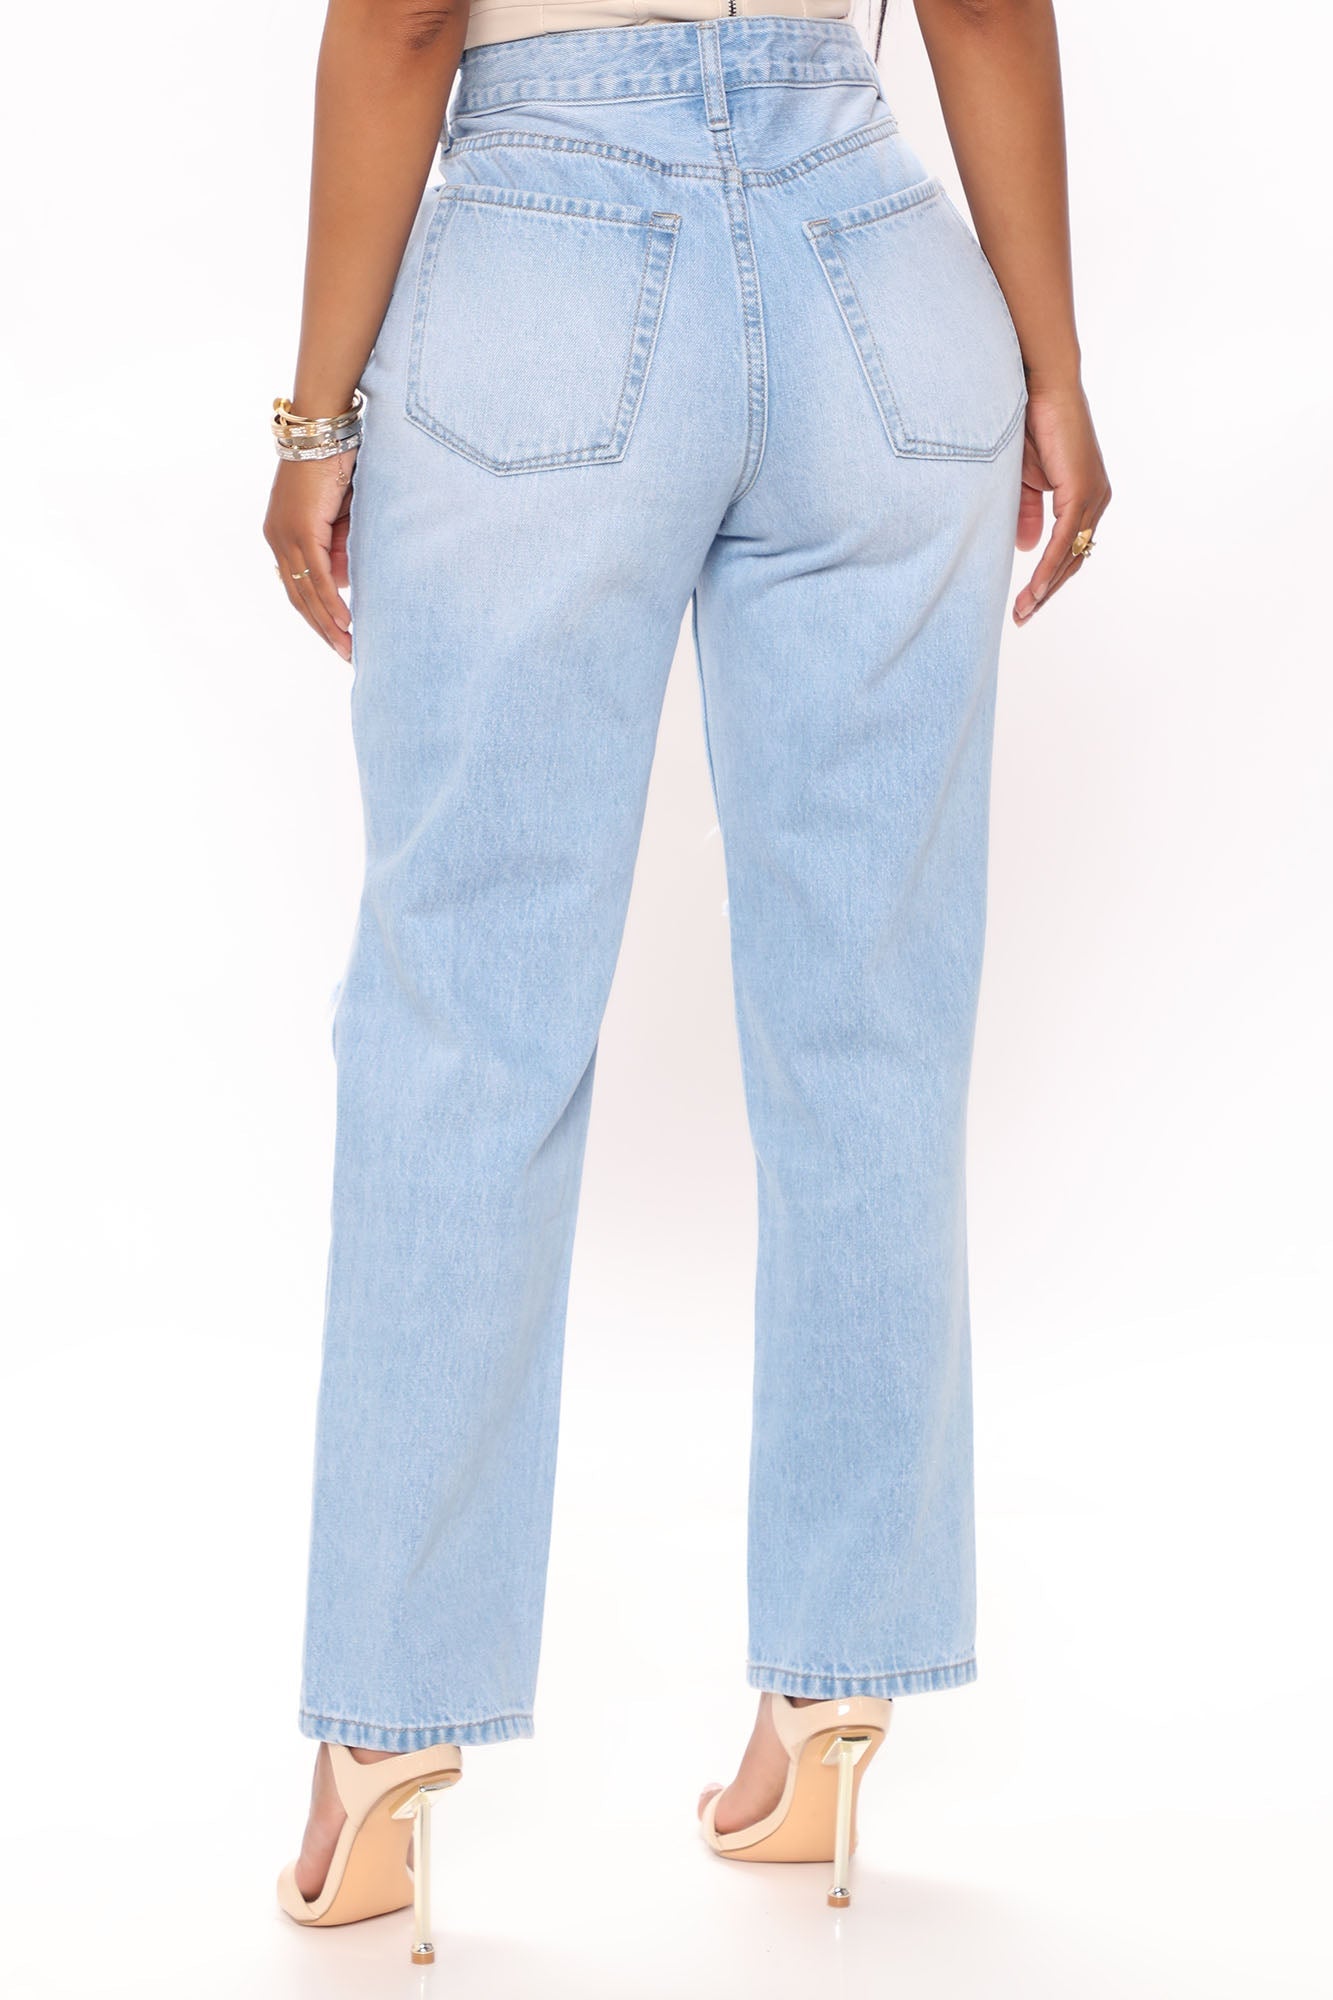 So Into You High Rise Mom Jeans - Light Blue Wash – InsStreet